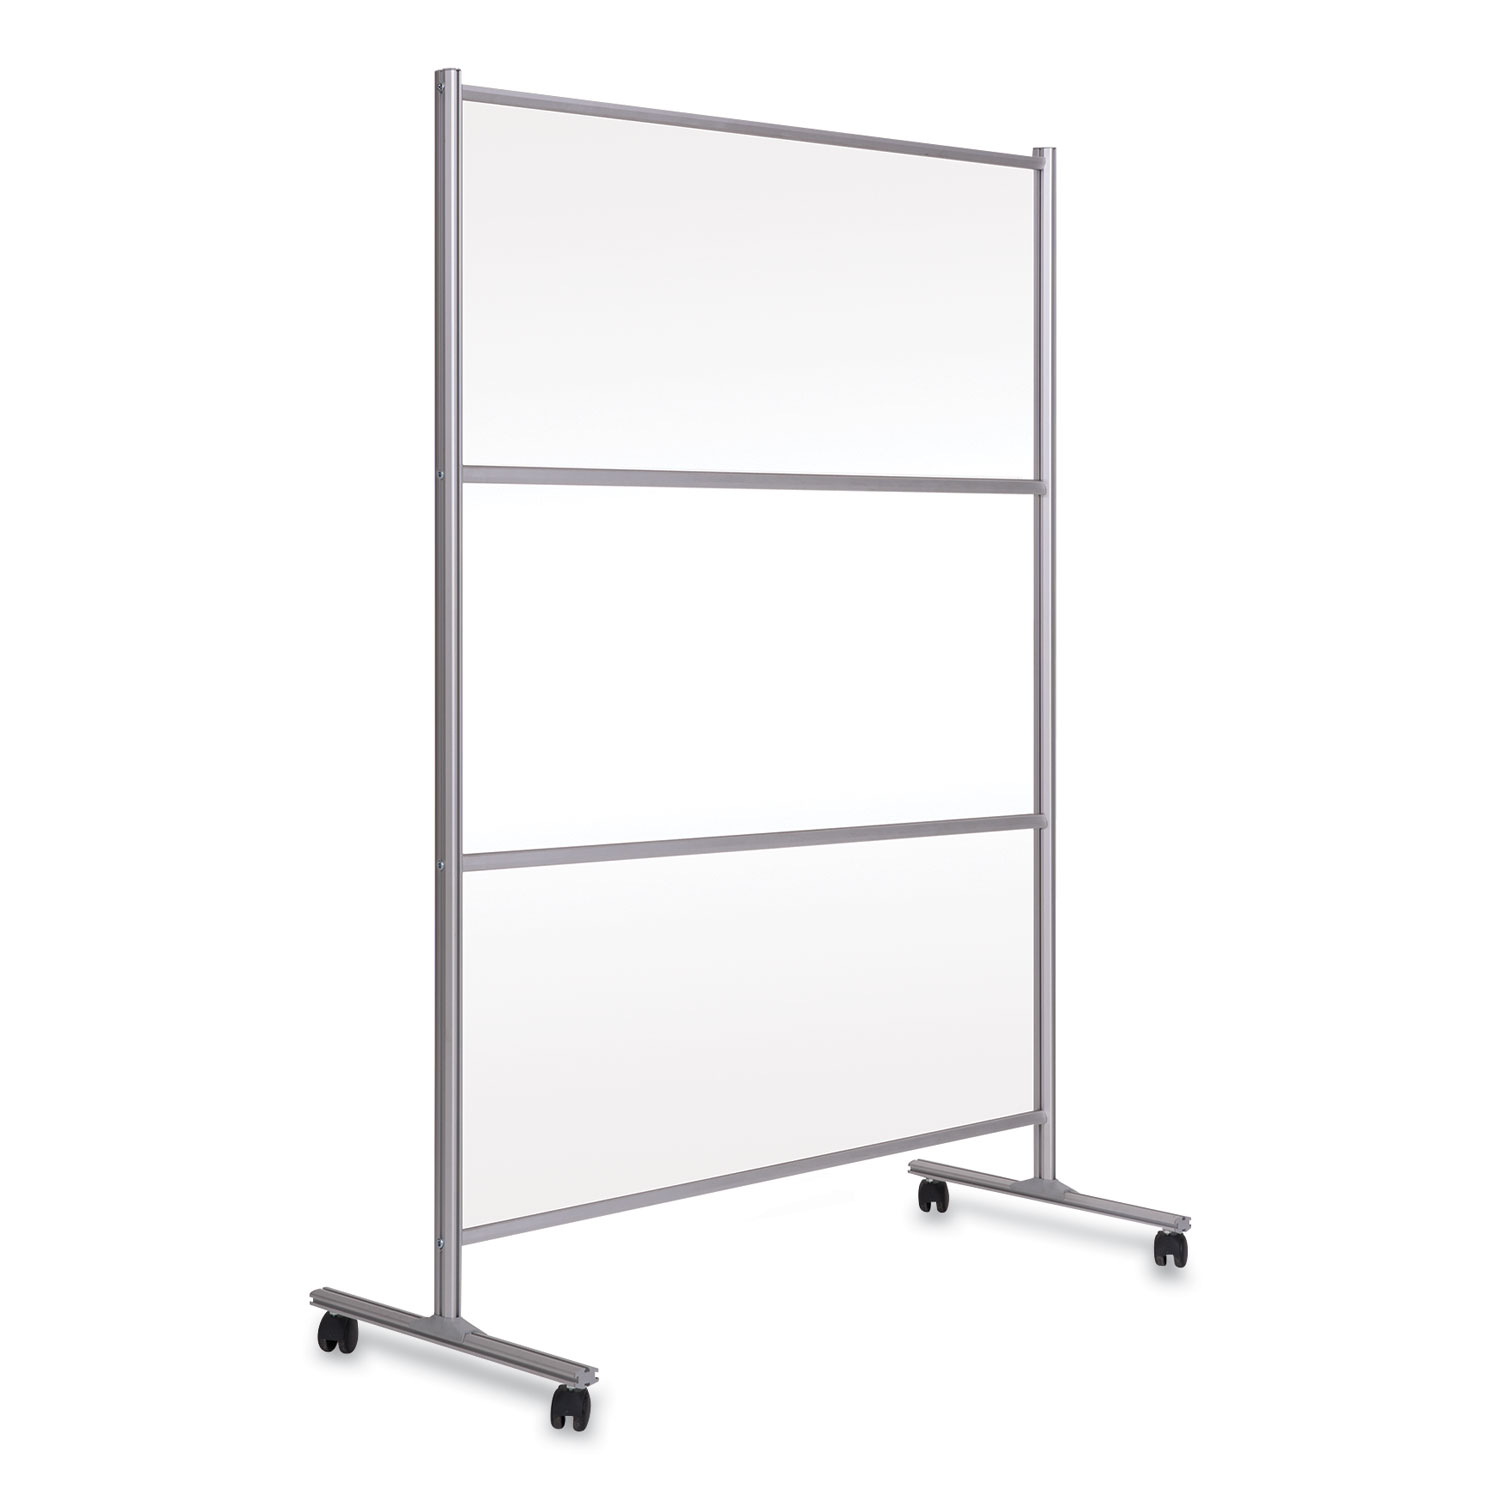 MasterVision® Protector Series Mobile Glass Panel Divider, 68.5 x 22 x 50, Clear/Aluminum